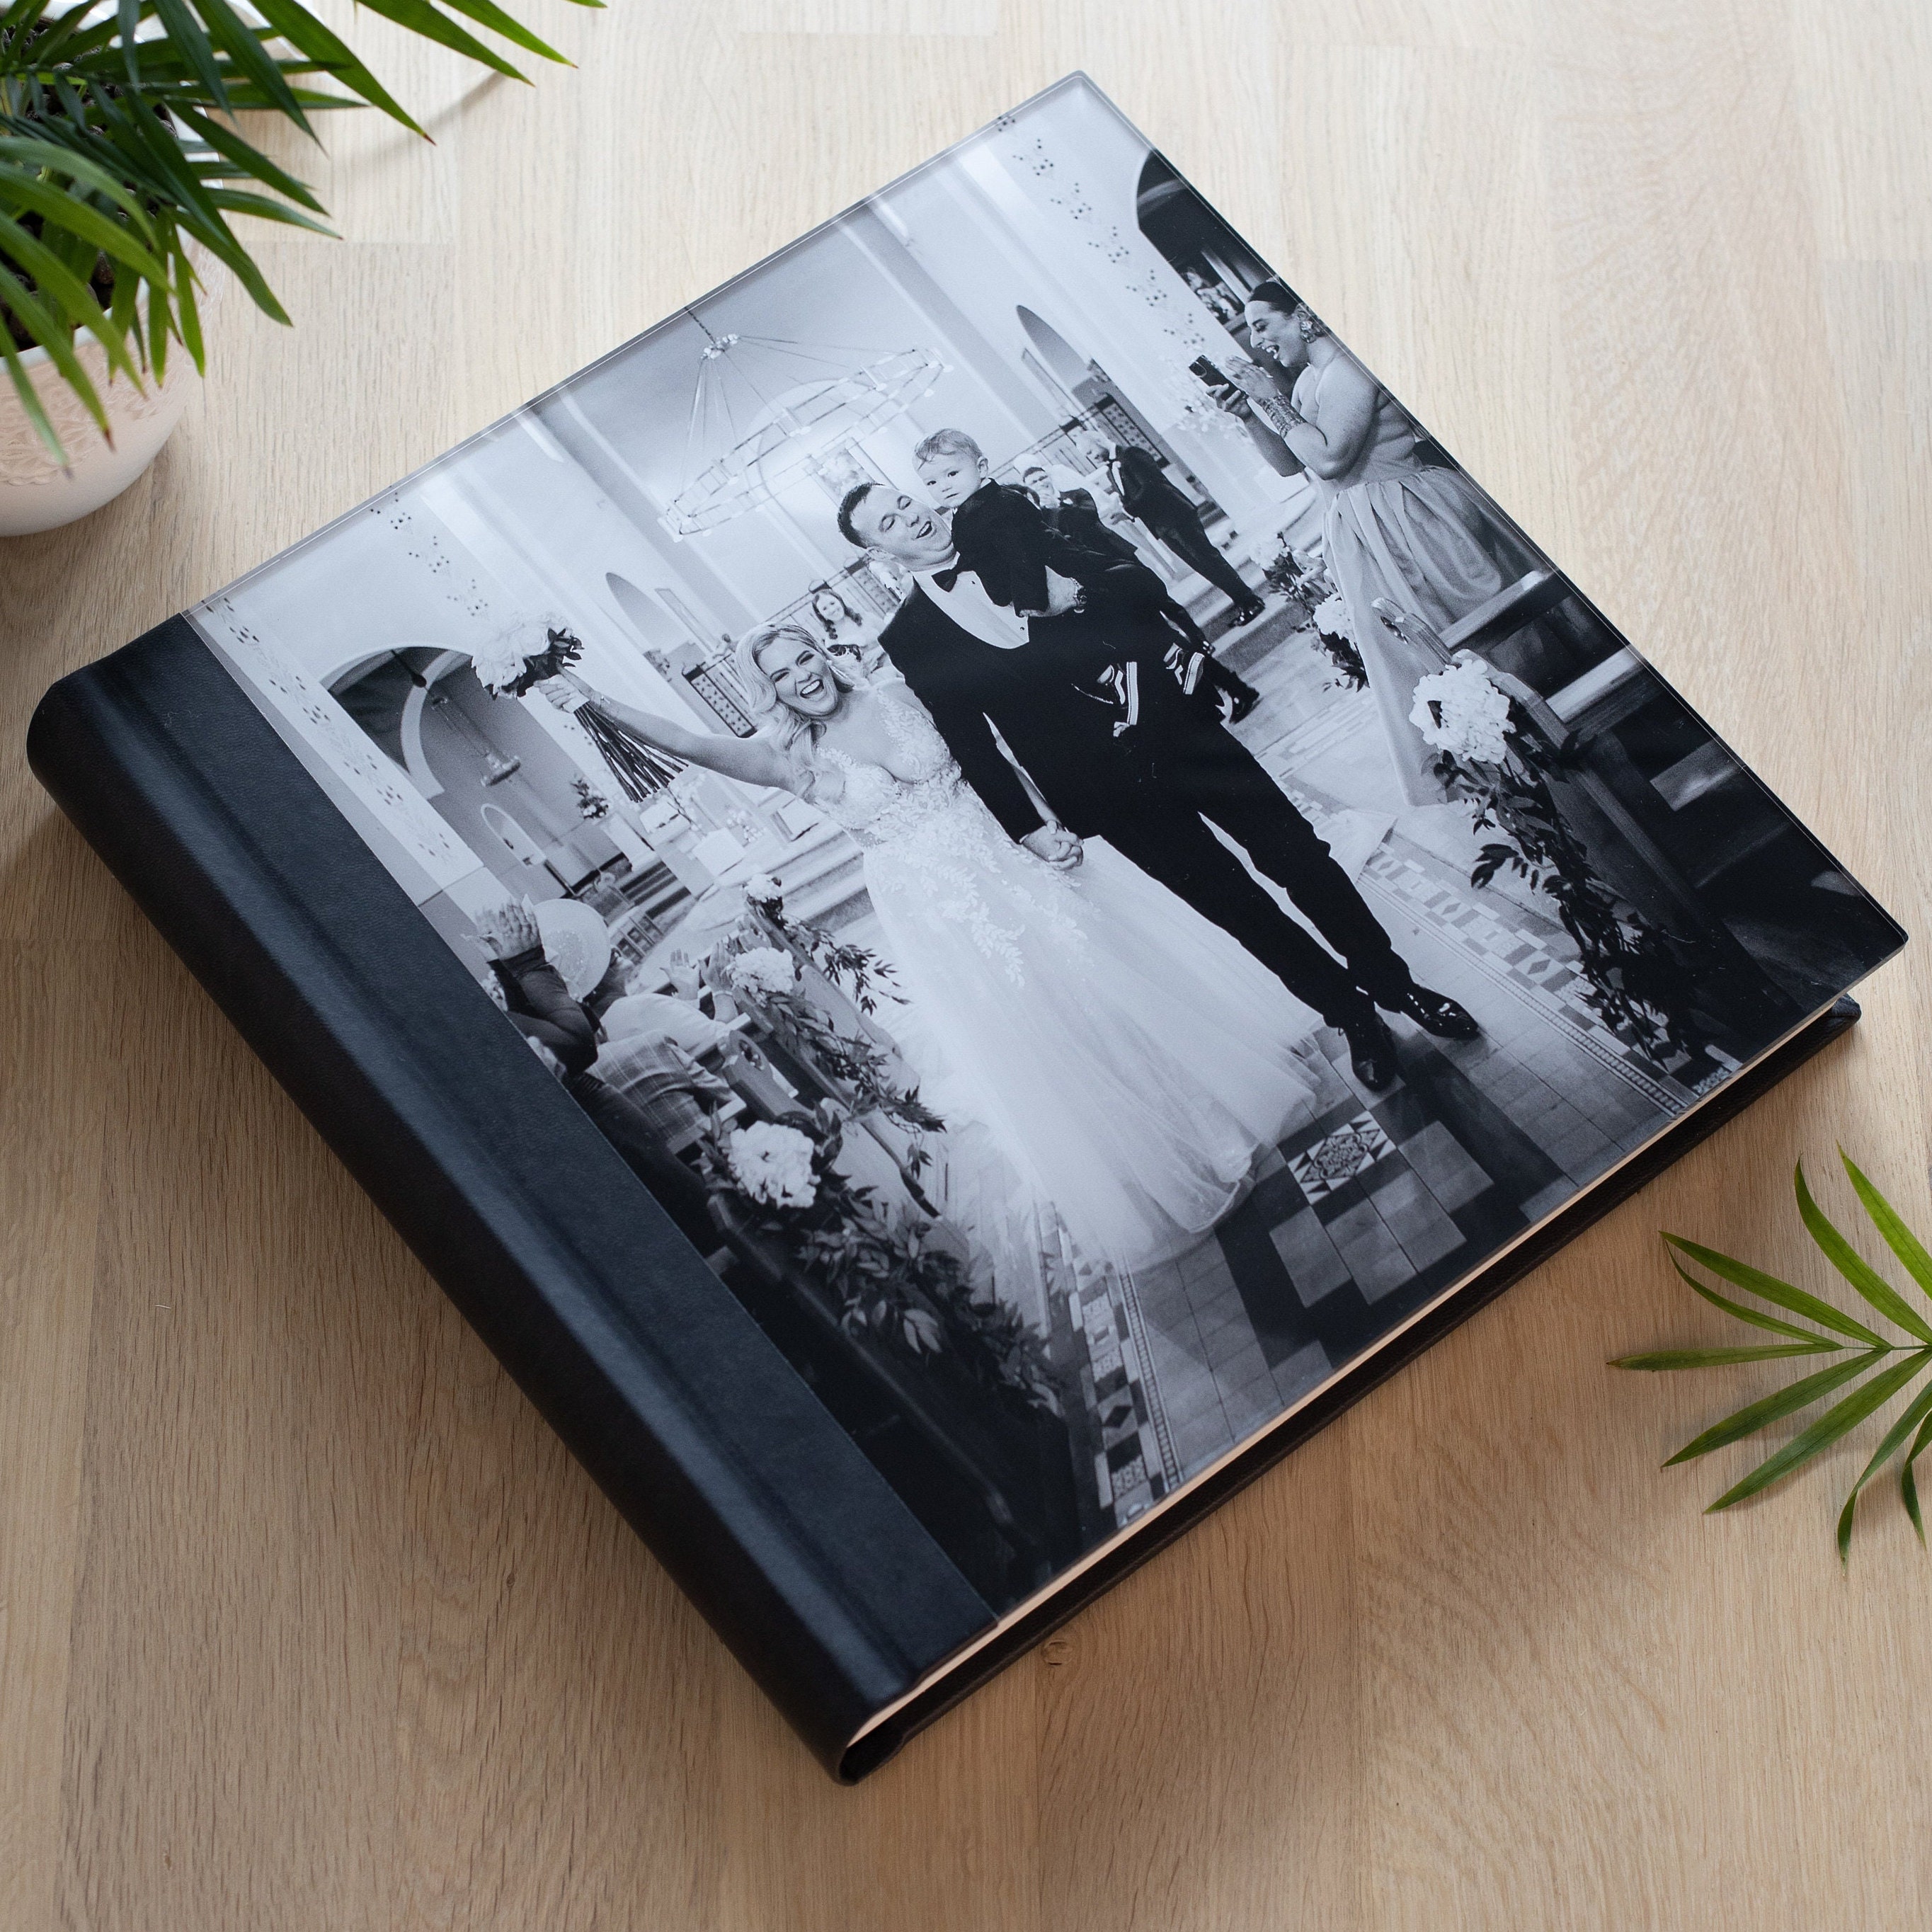  4x6 Photo Albums Storage, Picture Book for 4x6 Photos, Clear  Cover Portfolio Folder for Postcards, Art Books Card Holds for Artwork,  Wedding Journey Photo Book, 40 Pages Hold 80 Pictures 